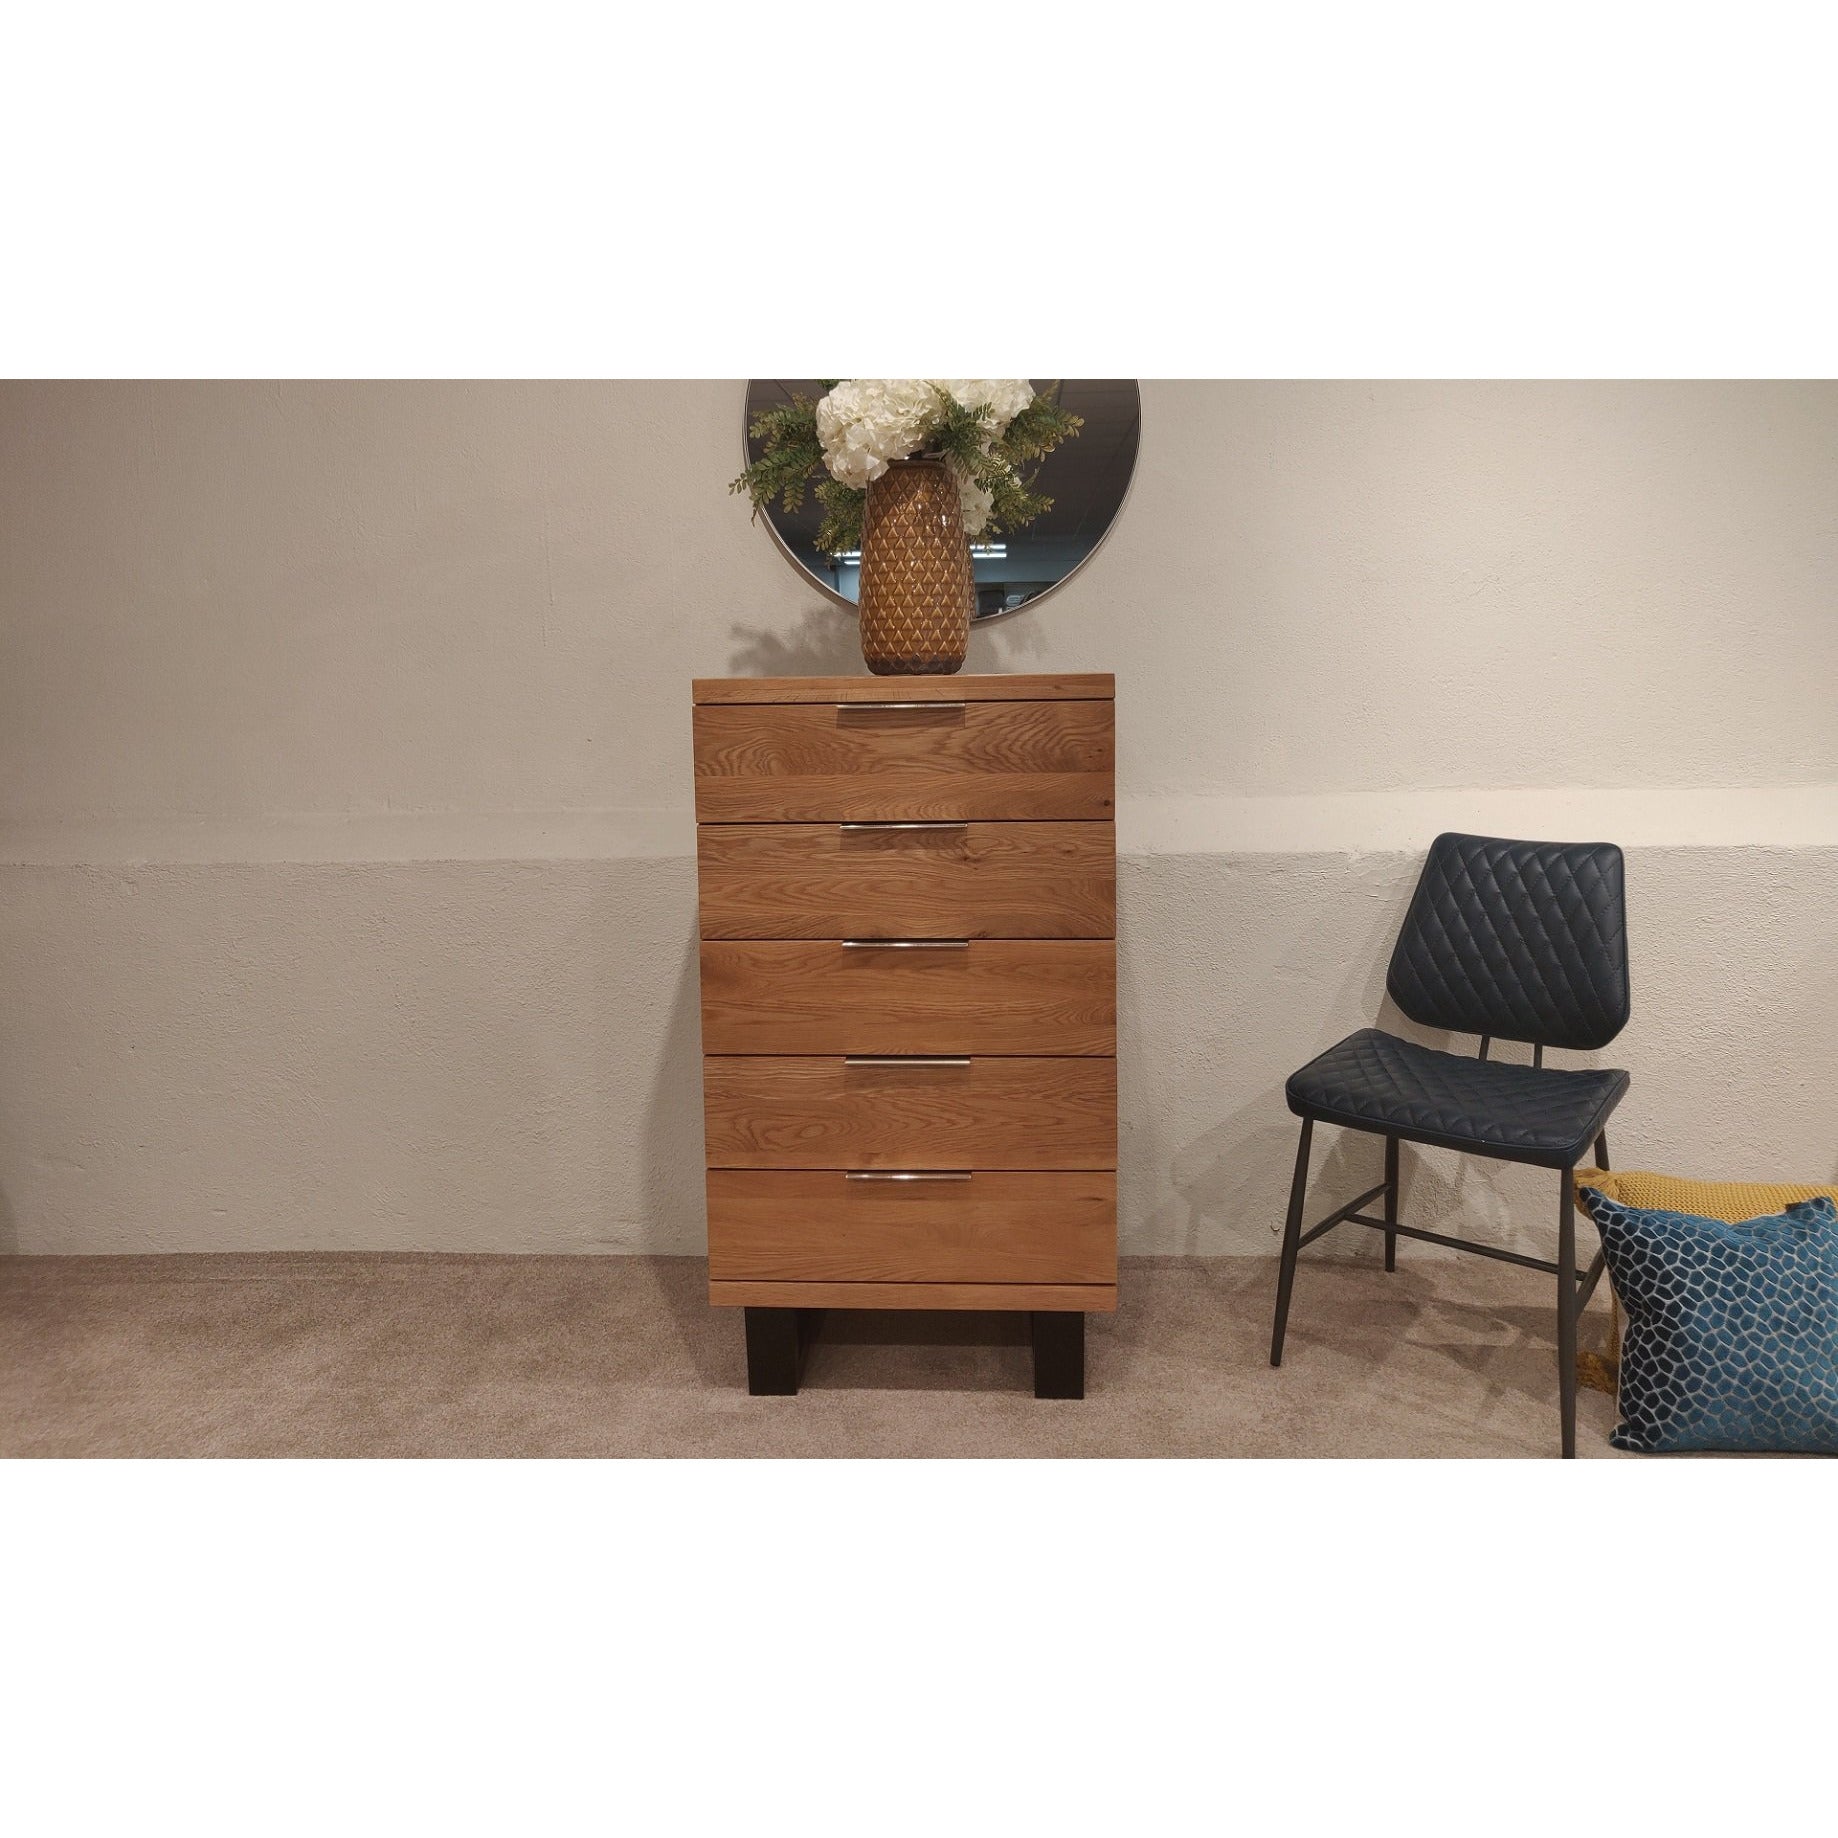 Kala 5 Drawer Tallboy from Upstairs Downstairs Furniture in Lisburn, Monaghan and Enniskillen